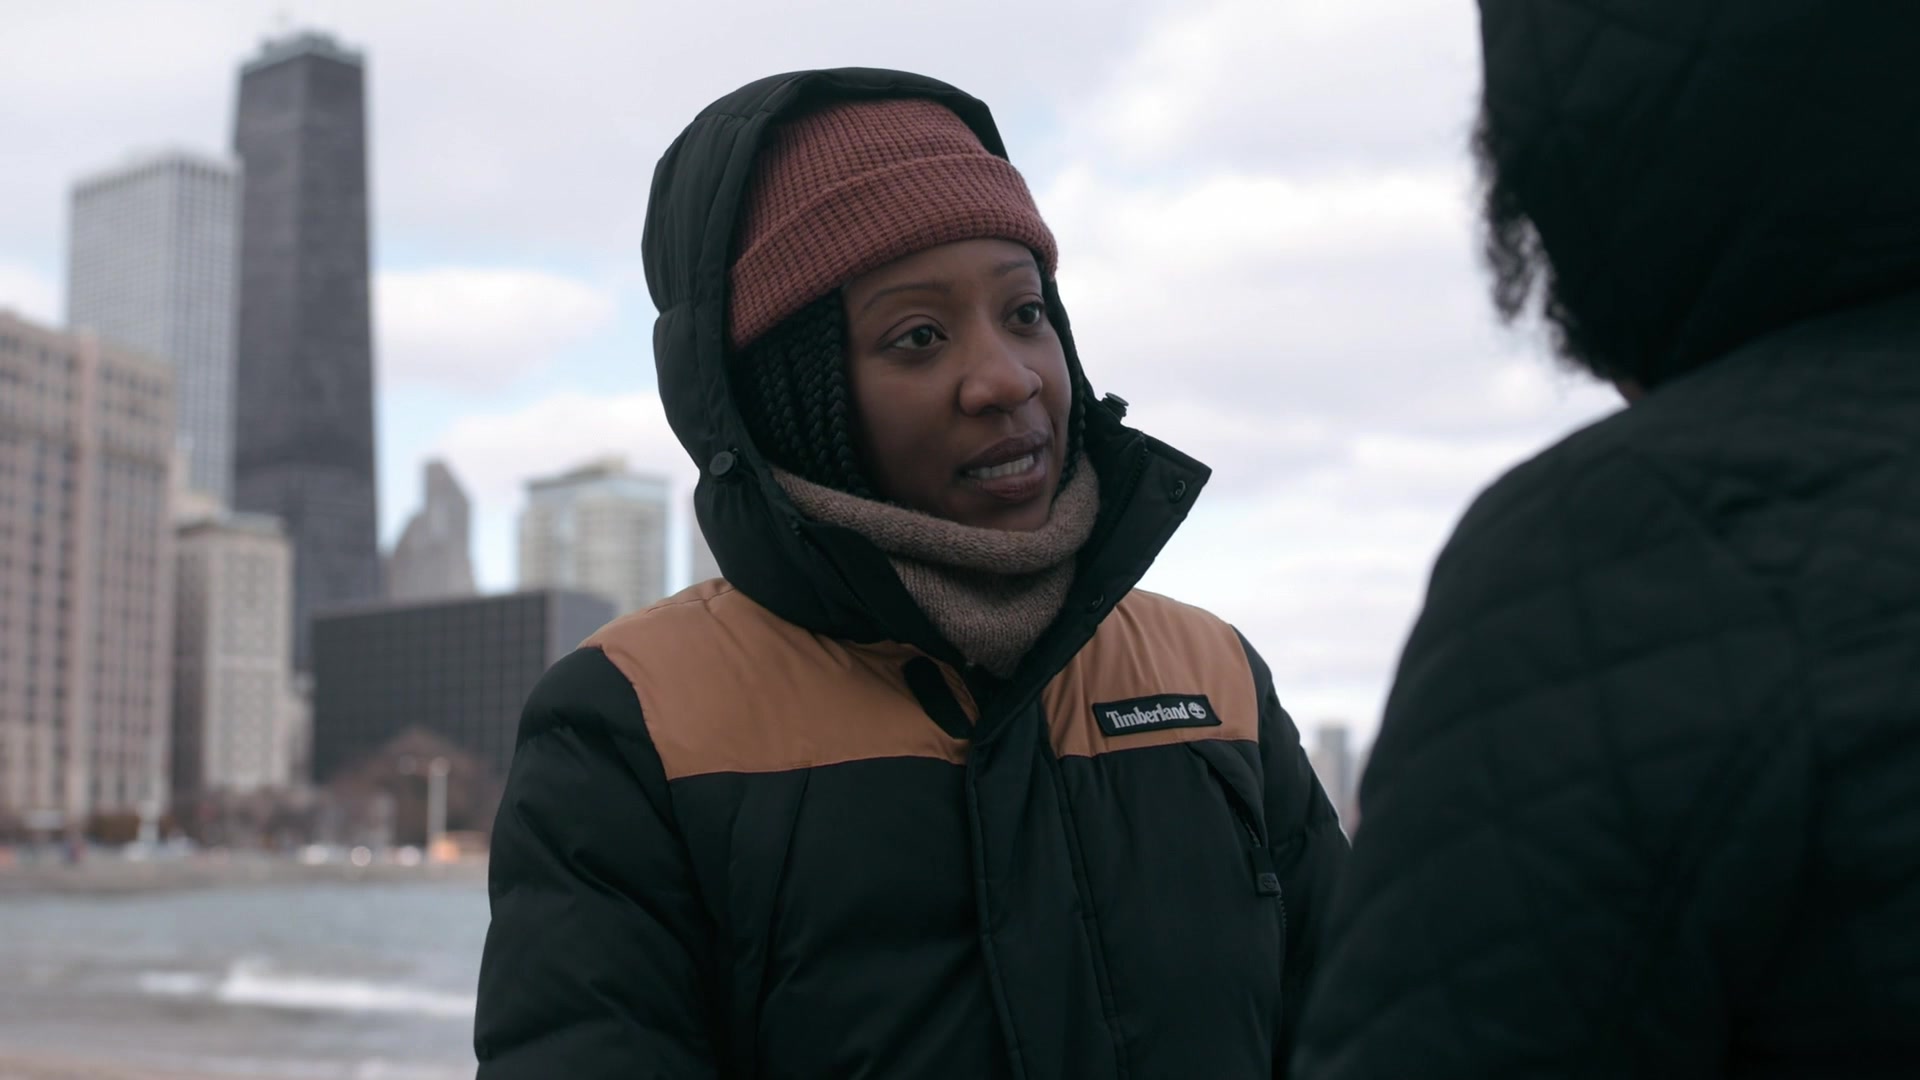 Timberland Puffer Jacket In The Chi S03E09 